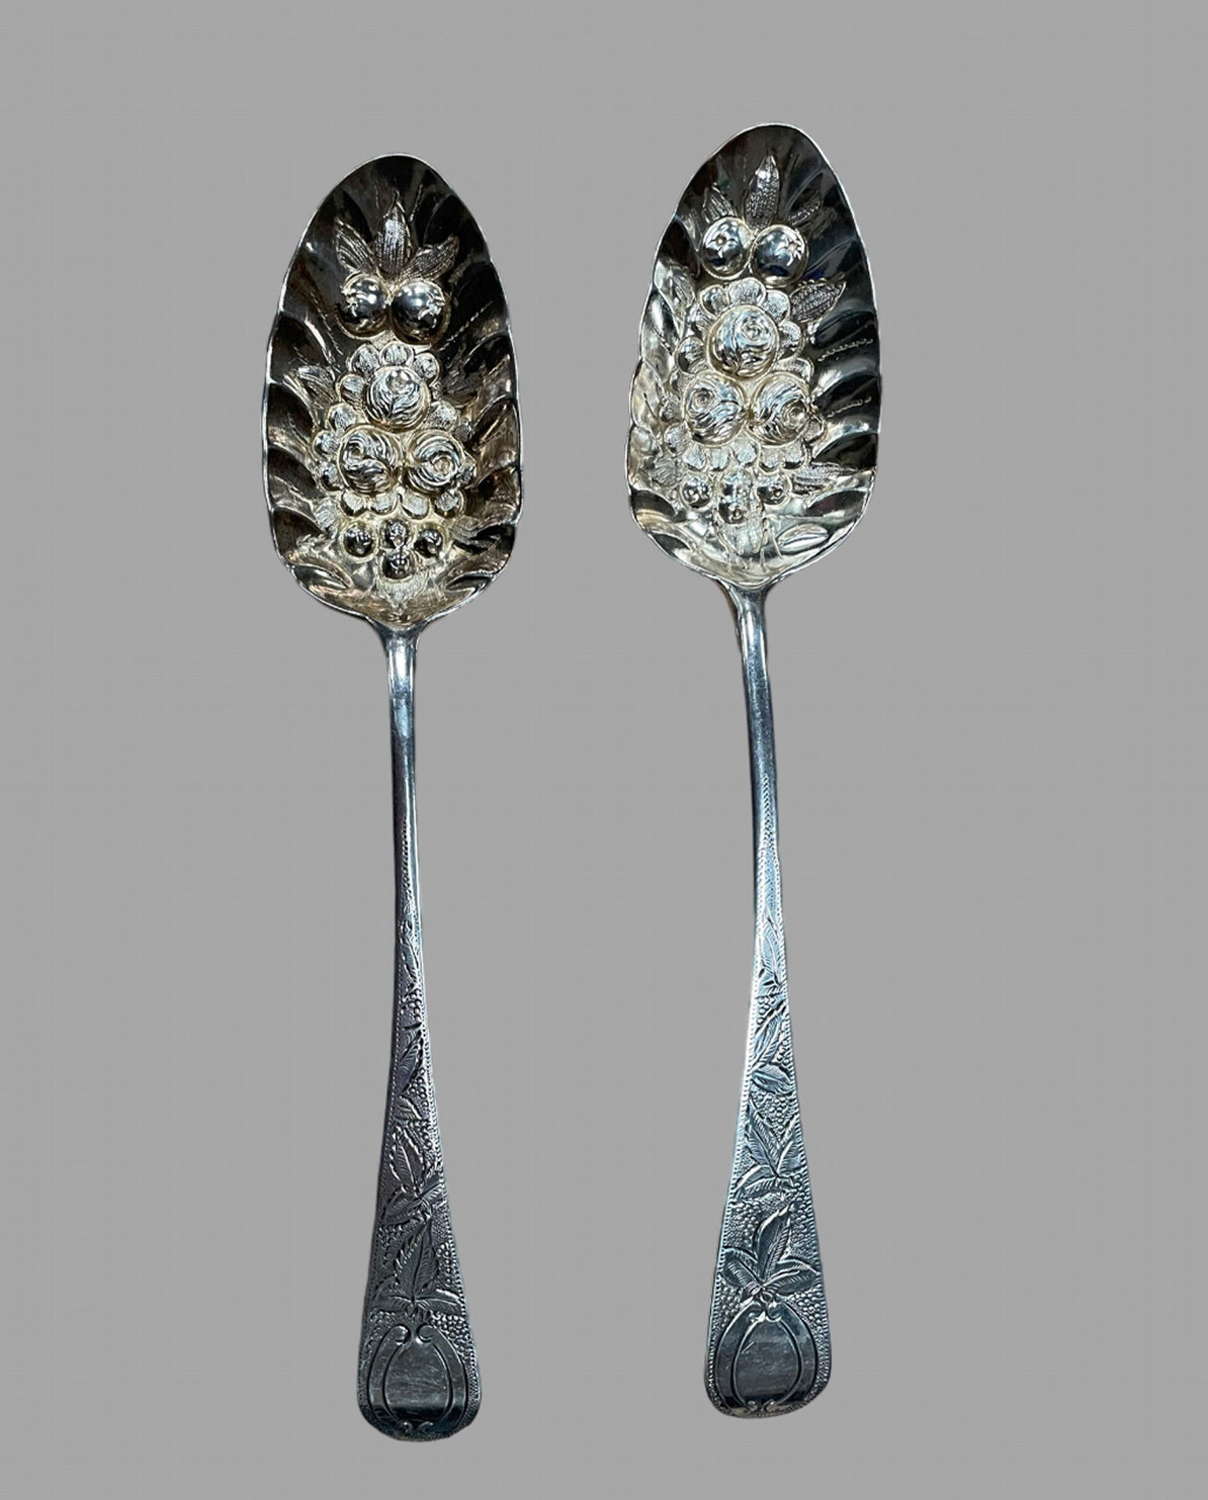 A Wonderful Pair of c1813 Silver Berry Spoons